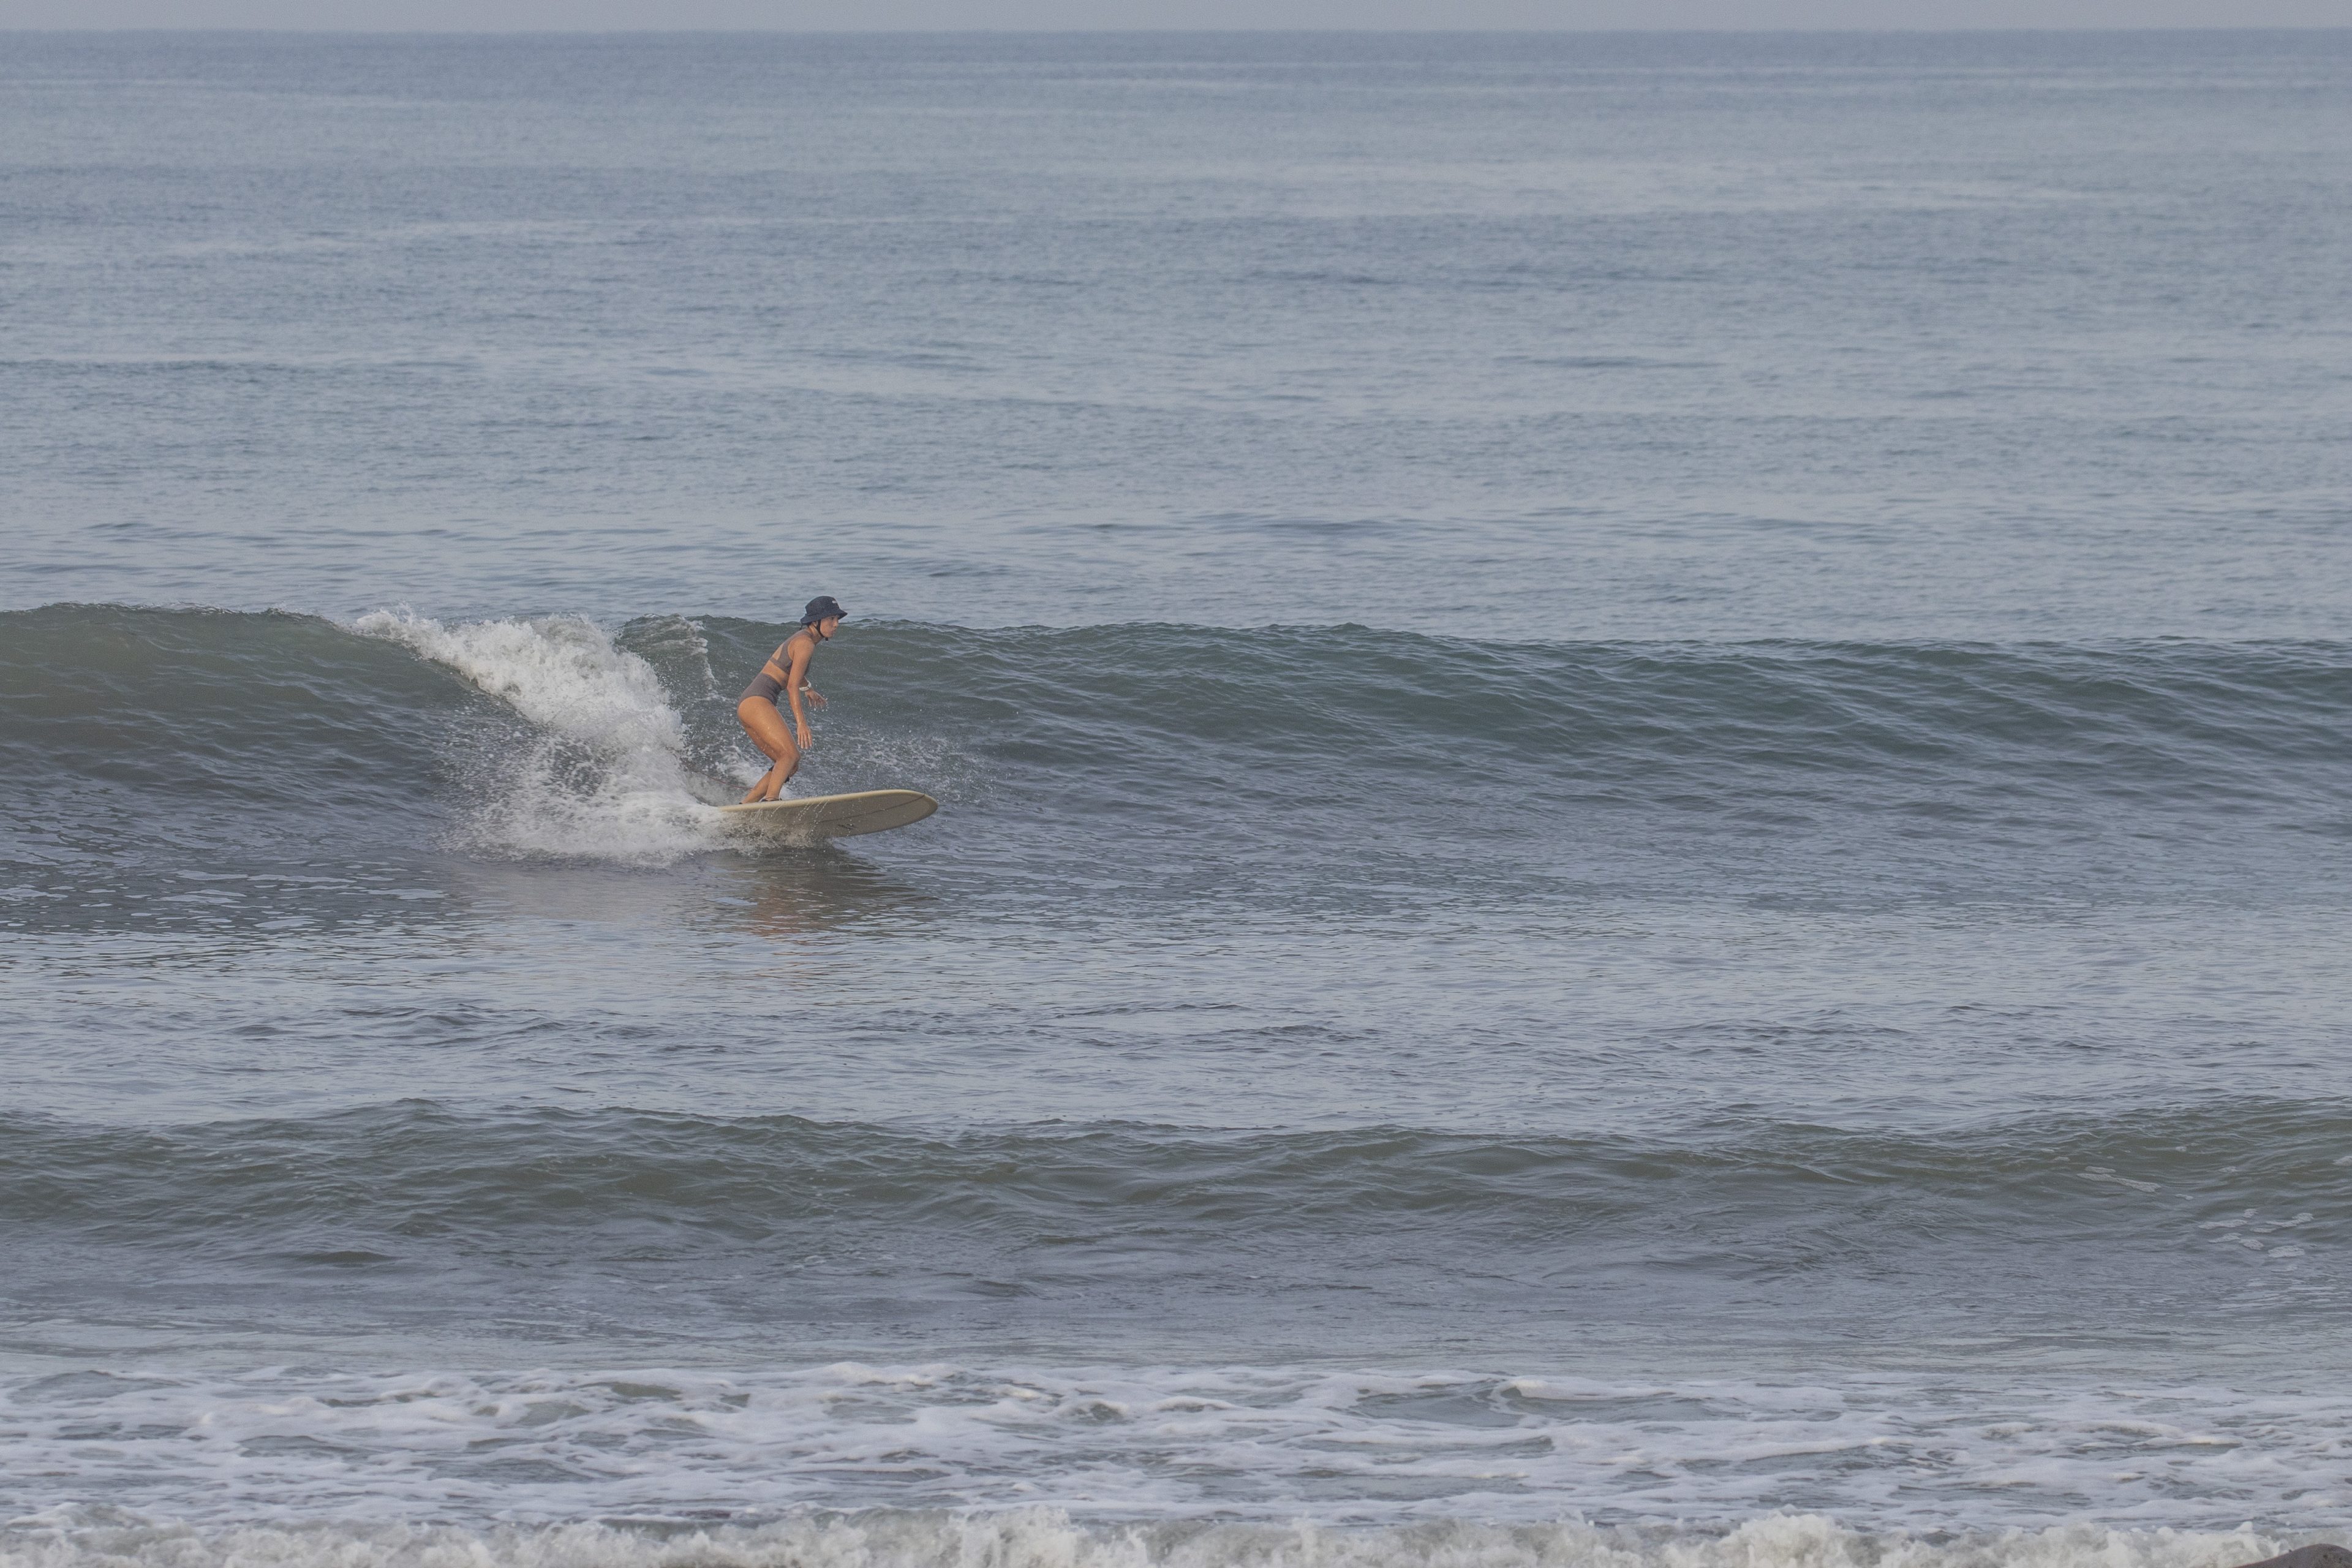 A longboarder riding a wave at Medewi.